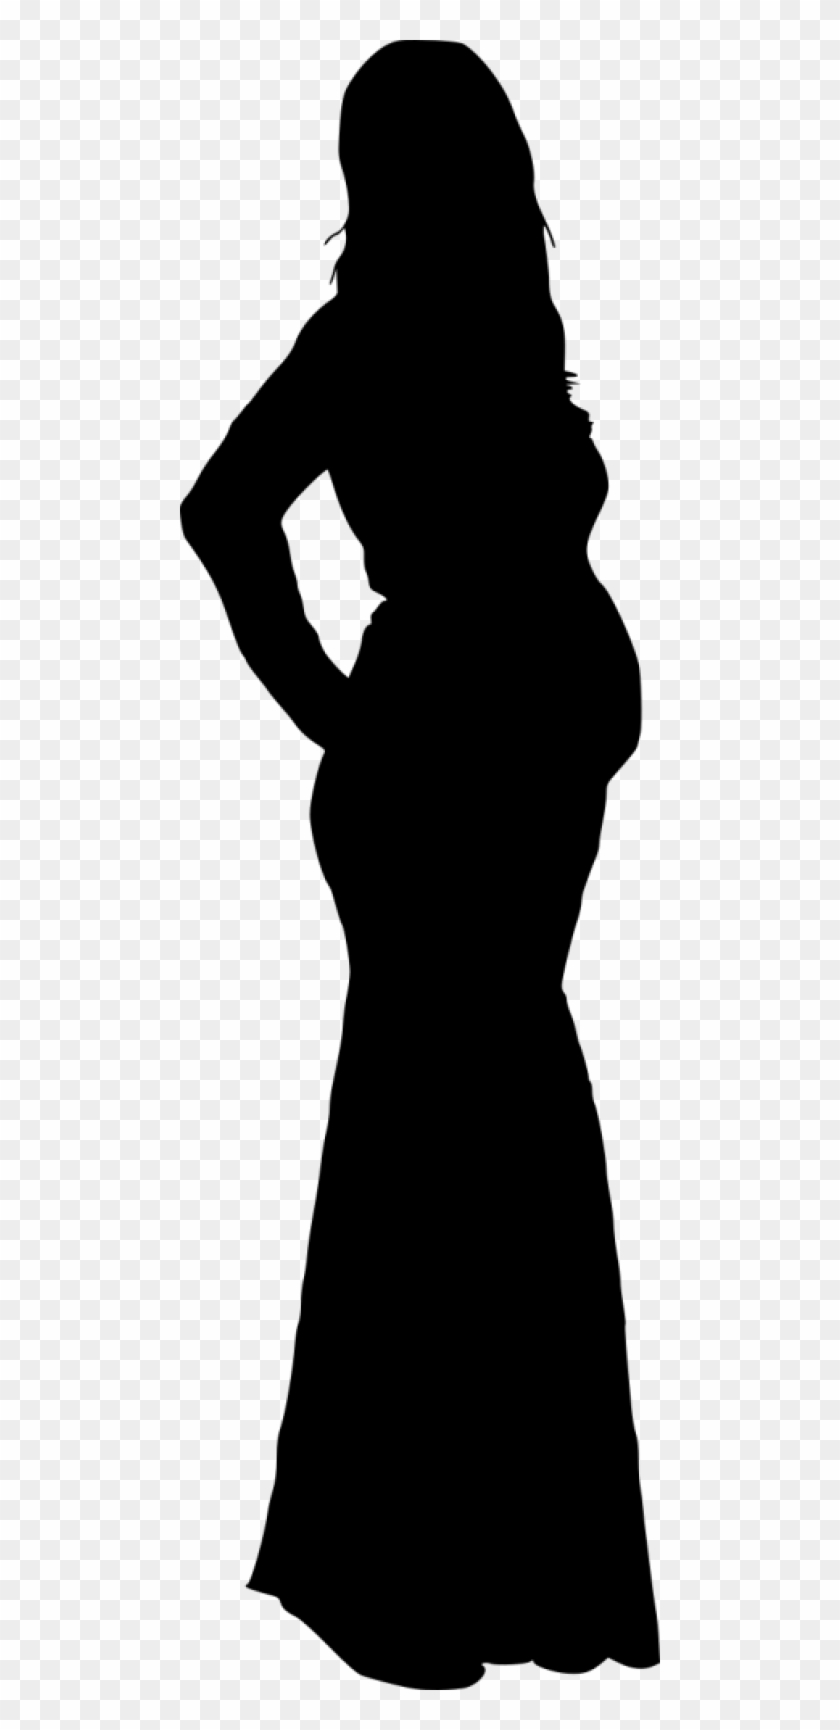 Free Download - Silhouette Transparent Of A Woman #723604